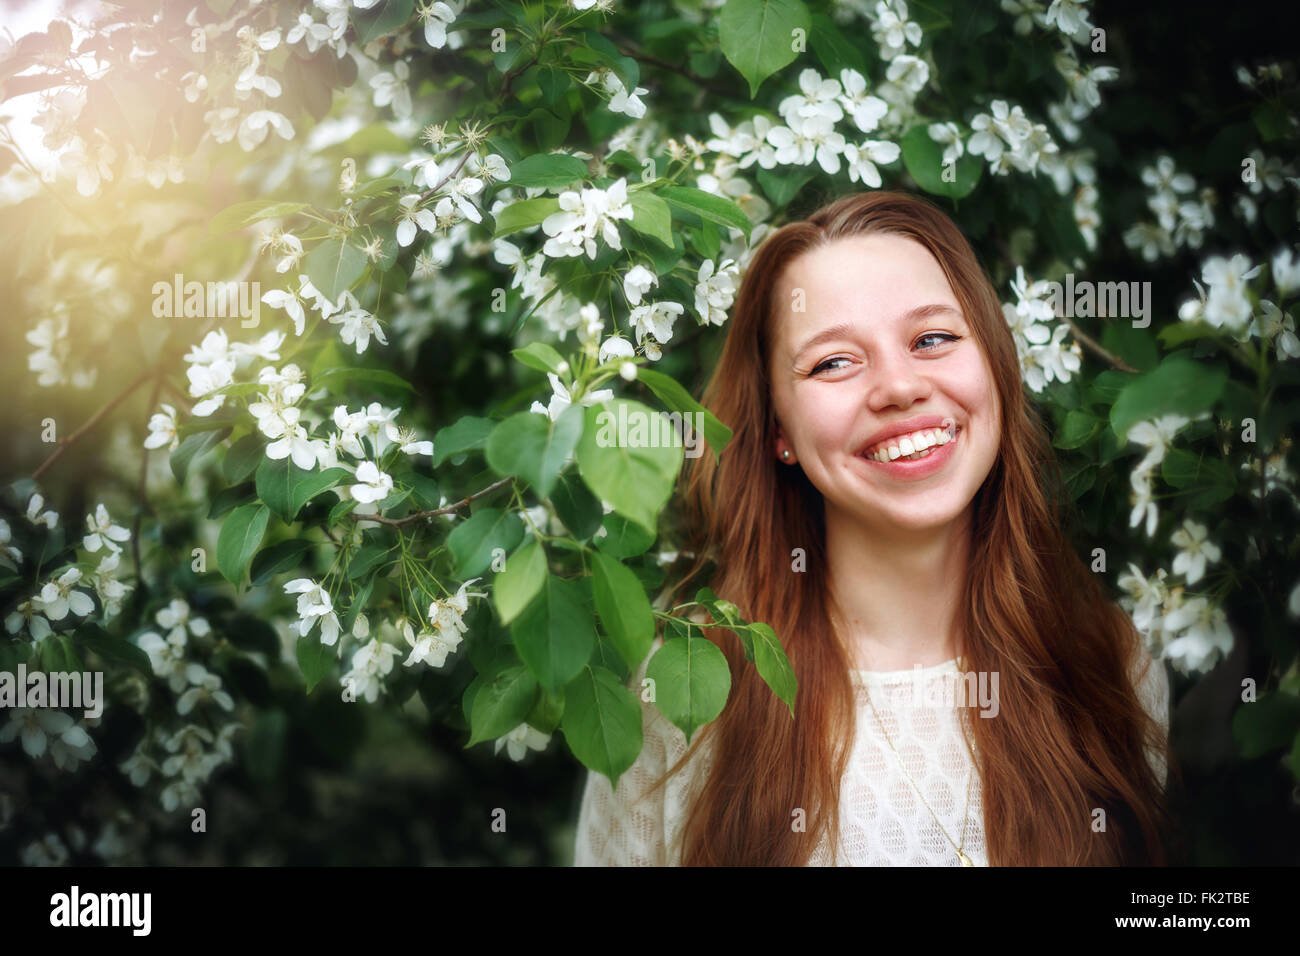 Headshot Portrait of Beautiful Young Woman among Spring Flowers at the Nature. Female Laughing and Enjoying Life and Moment. Stock Photo